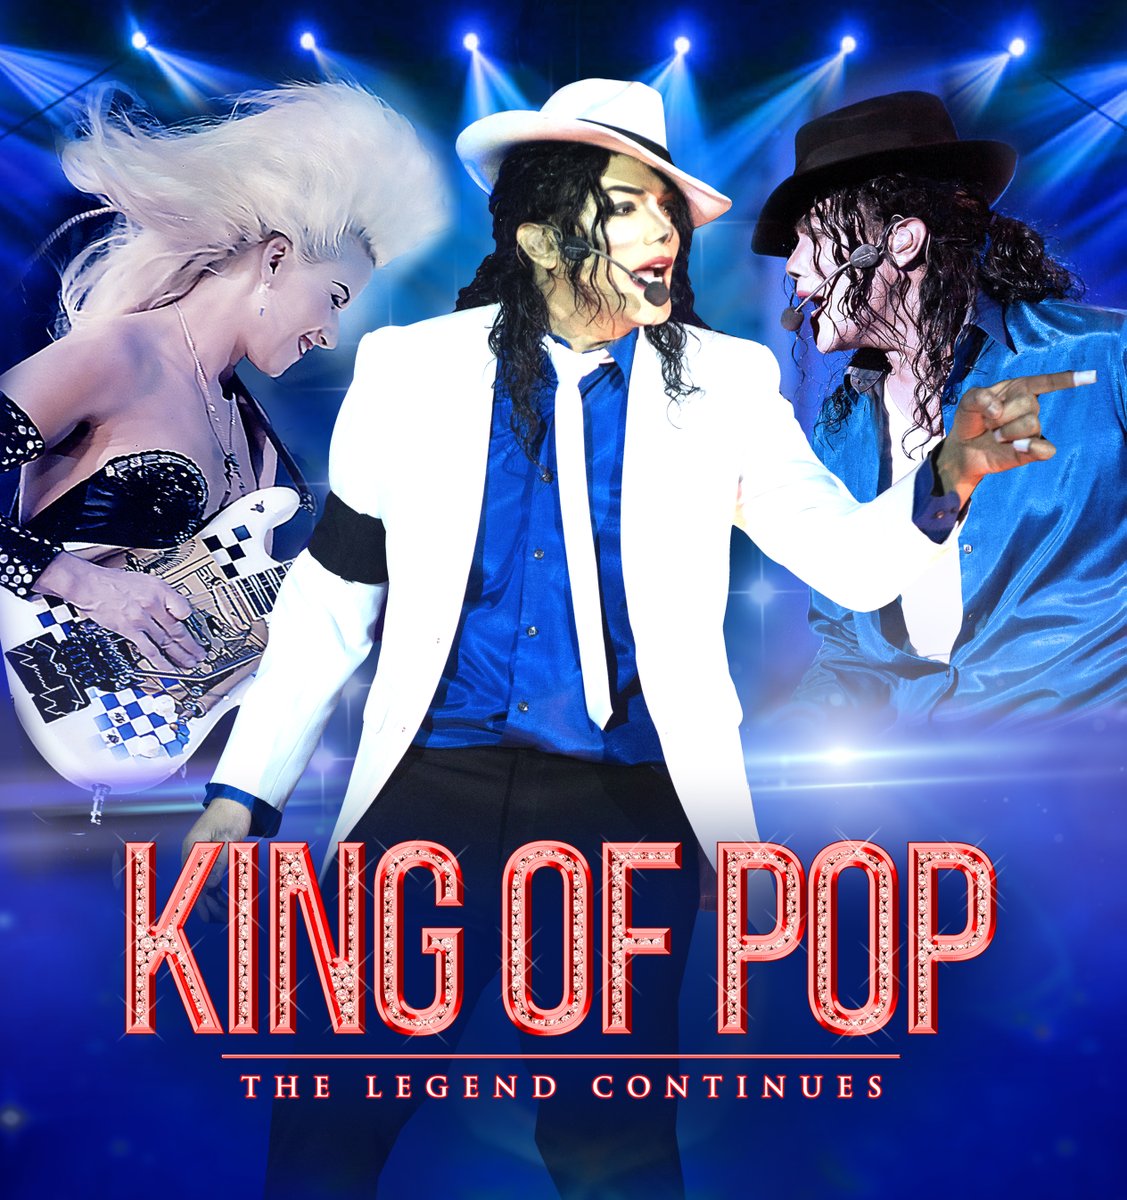 King of Pop featuring Navi 🗓️Thursday 25 April 7.30pm The world's leading Michael Jackson tribute artist Navi, joined by MJ's very own legendary guitarist - Jennifer Batten! 🎟️Book online: bedfordcornexchange.co.uk/events/king-of… or contact the Box Office on 01234 718044 #bedford #whatson